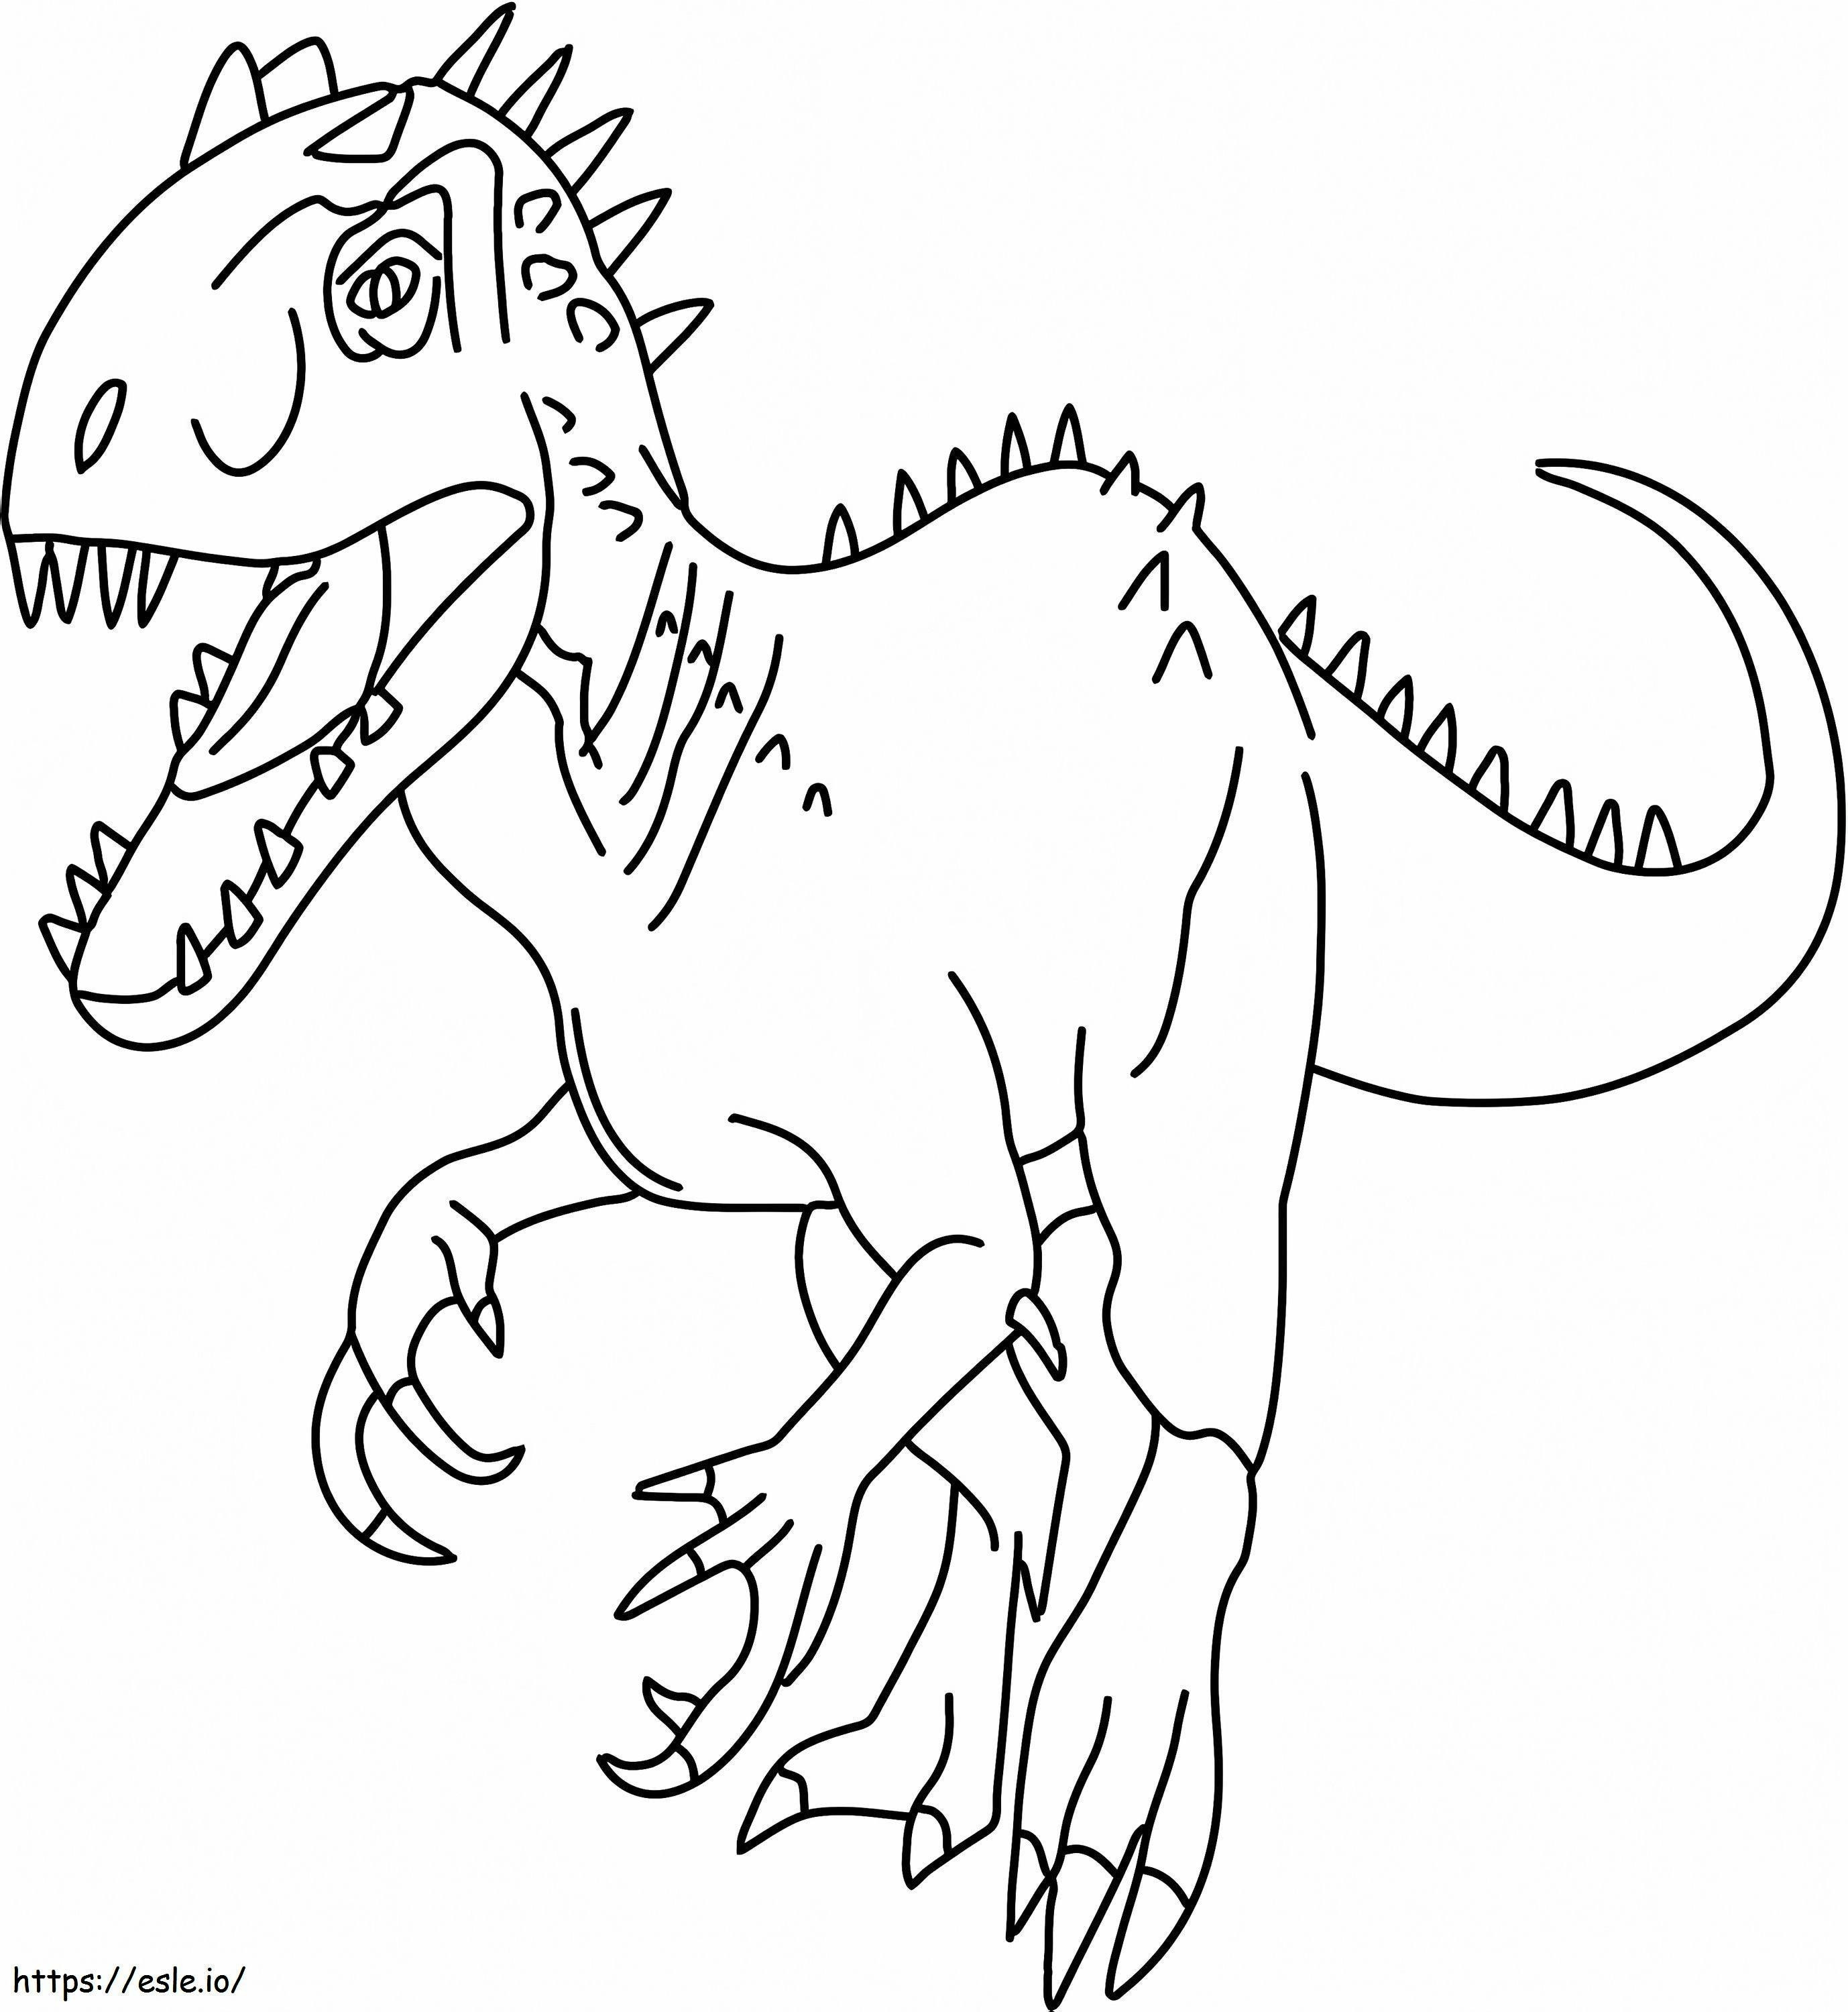 1574297194 Untitled 2 coloring page